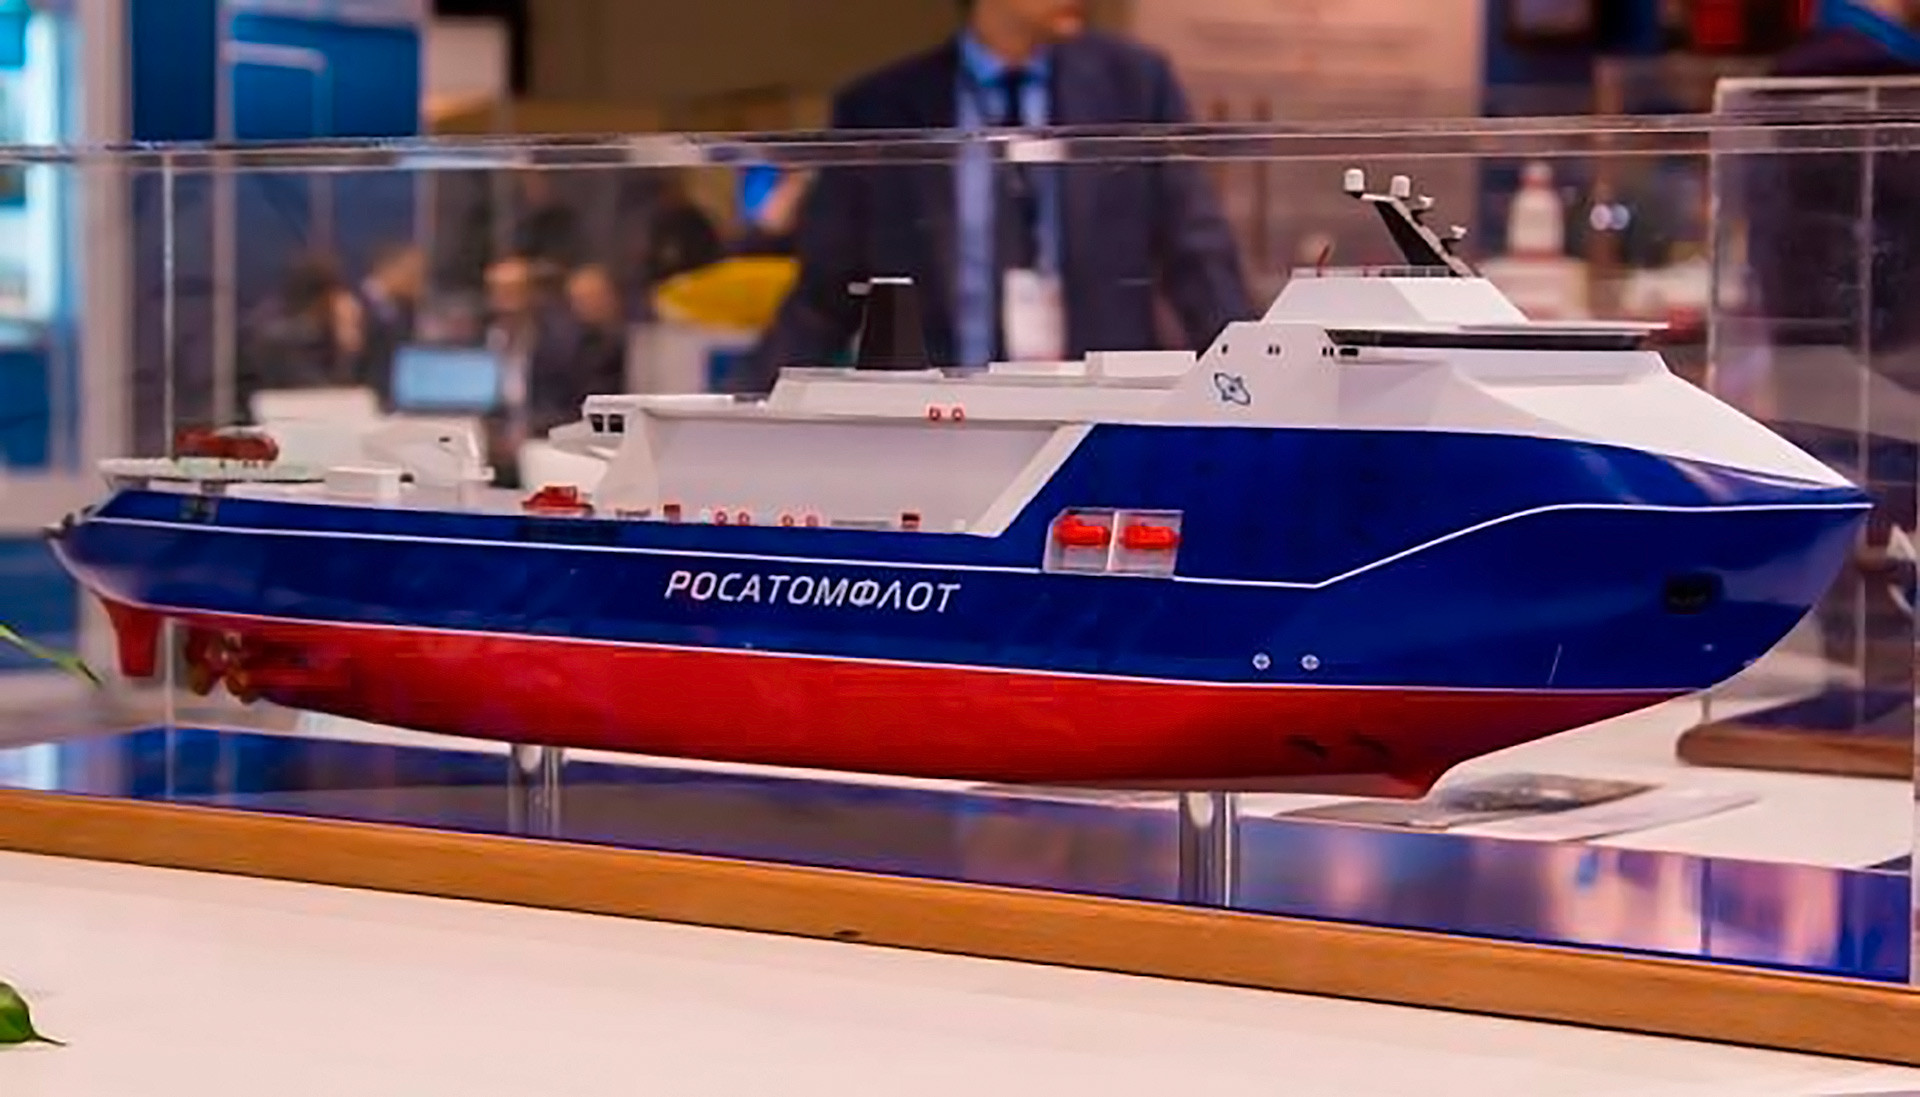 It’s one of the big money projects to replace the Soviet era icebreakers currently in service in the Russian fleet. The new one will have a speed of 14 knots (about 24 km/h) and be able to break ice up to 4.4 m thick.